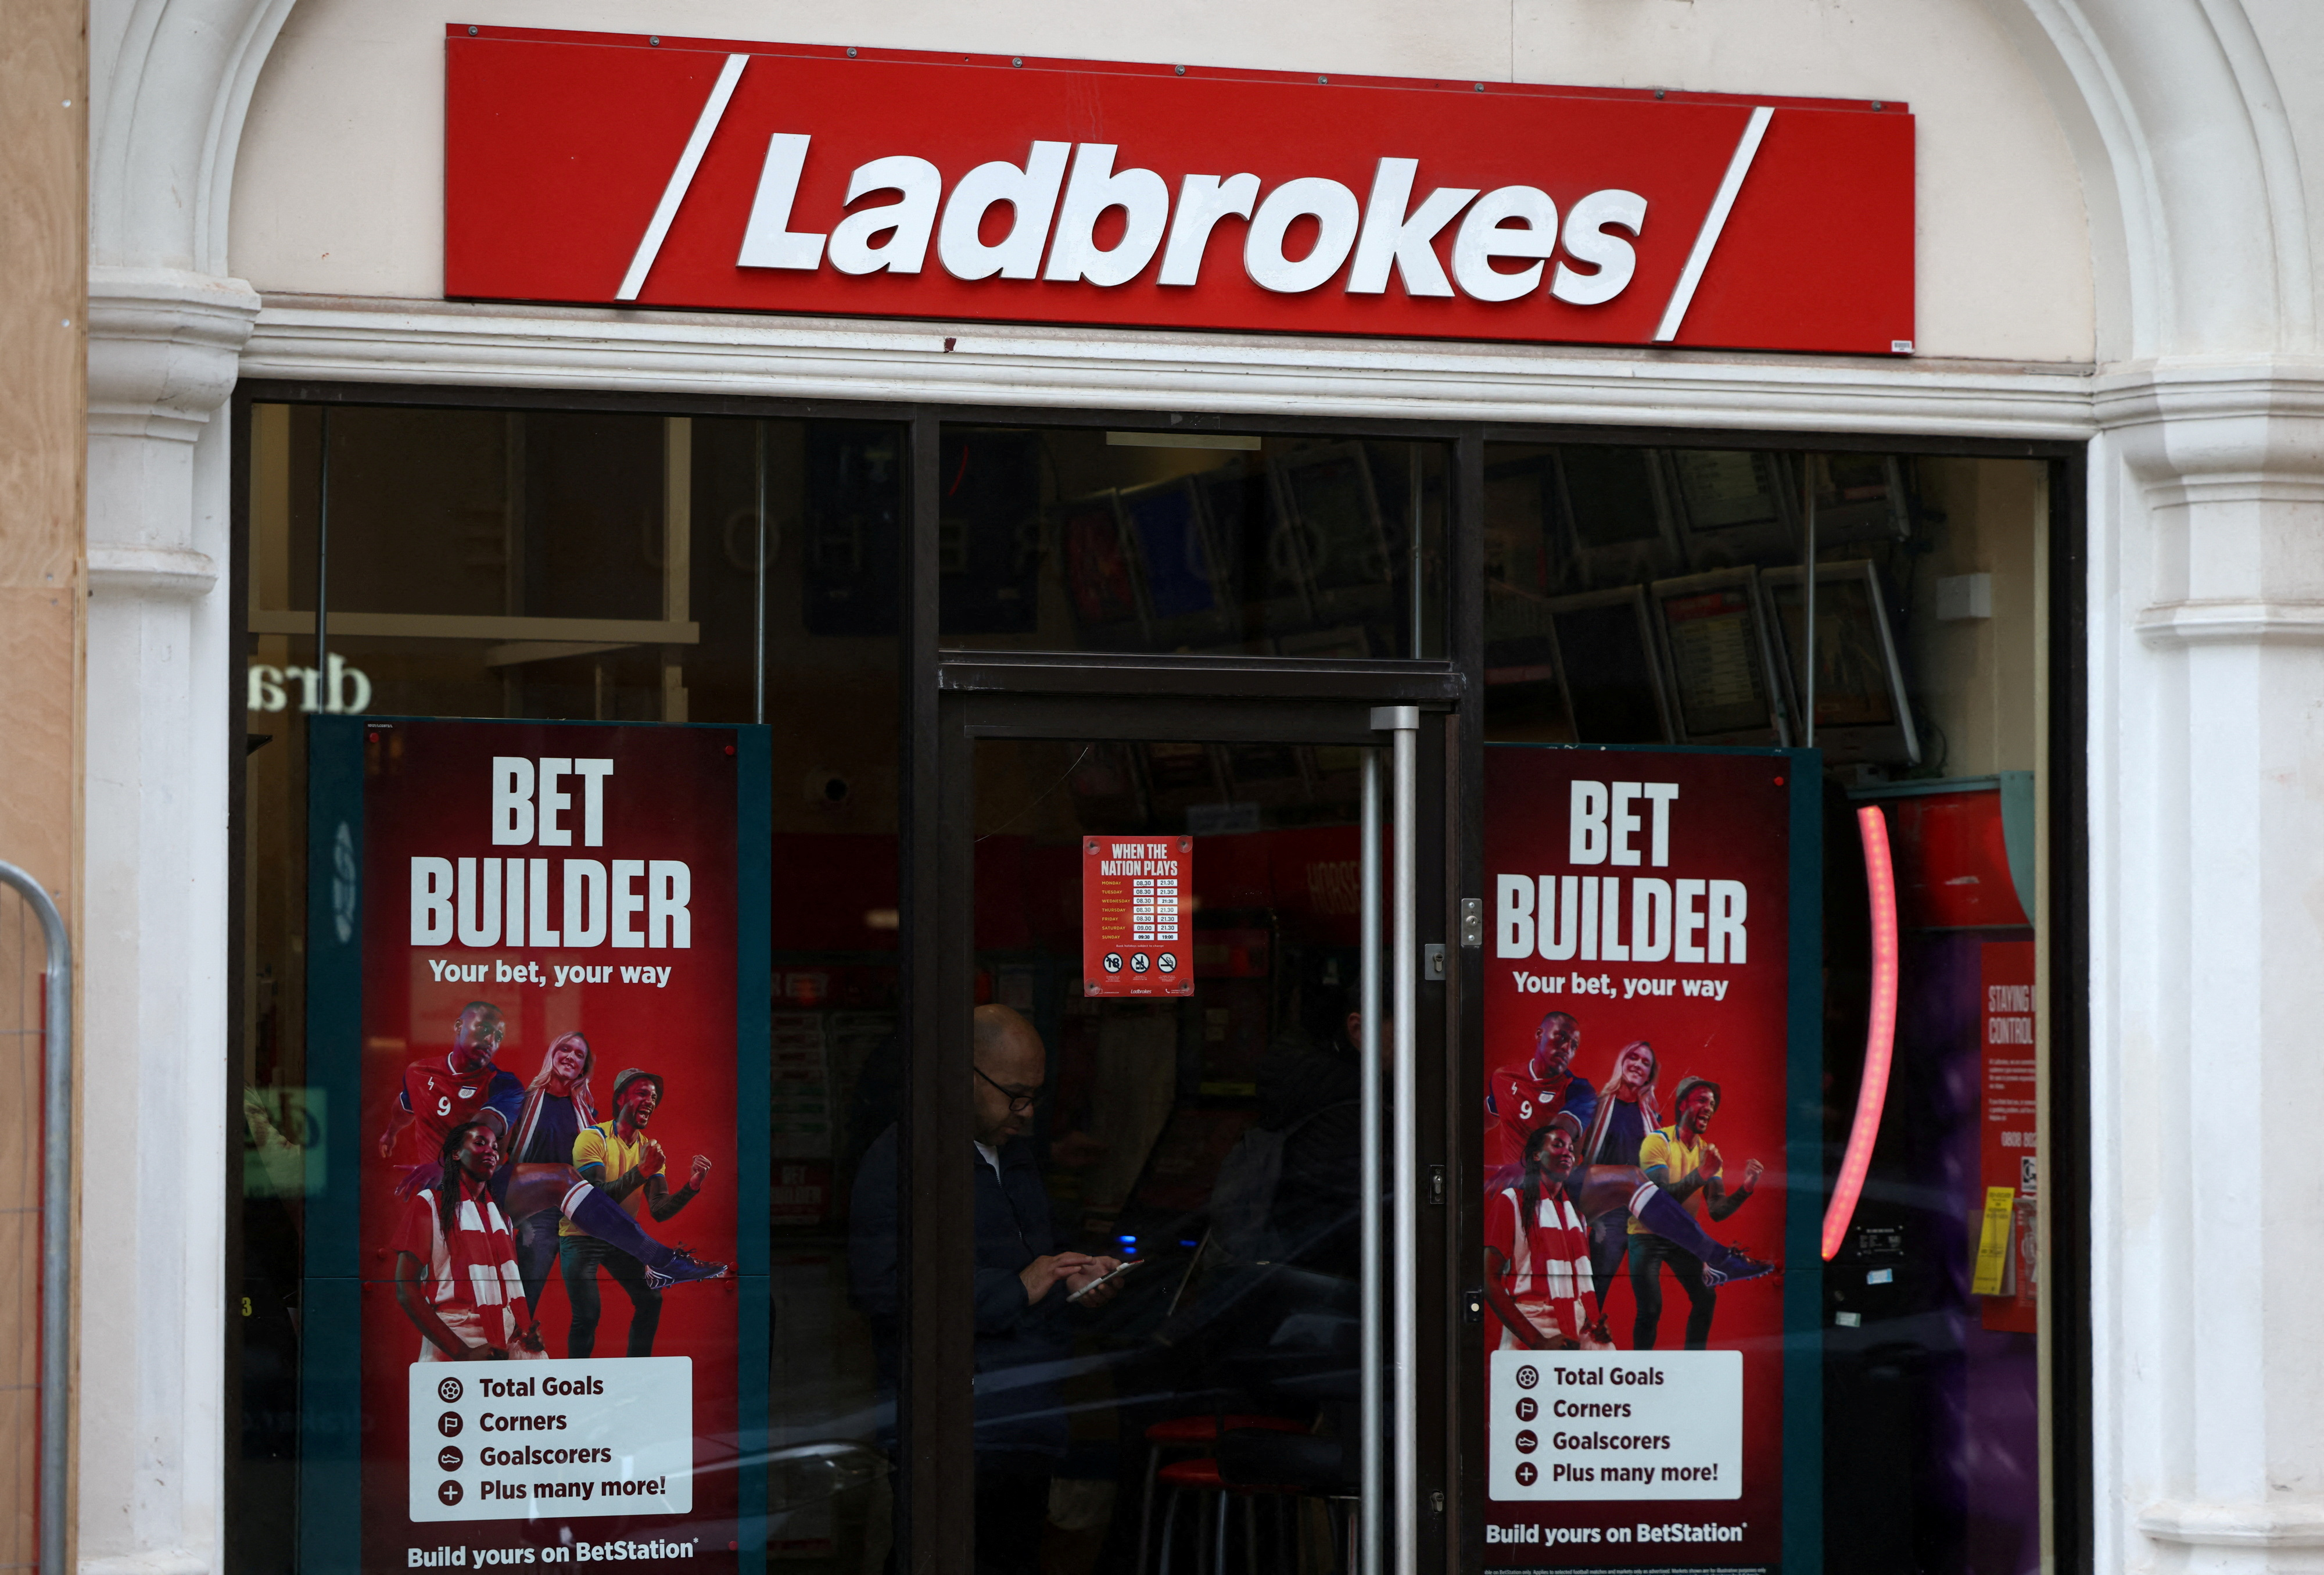 A person stands inside a Ladbrokes betting shop in London